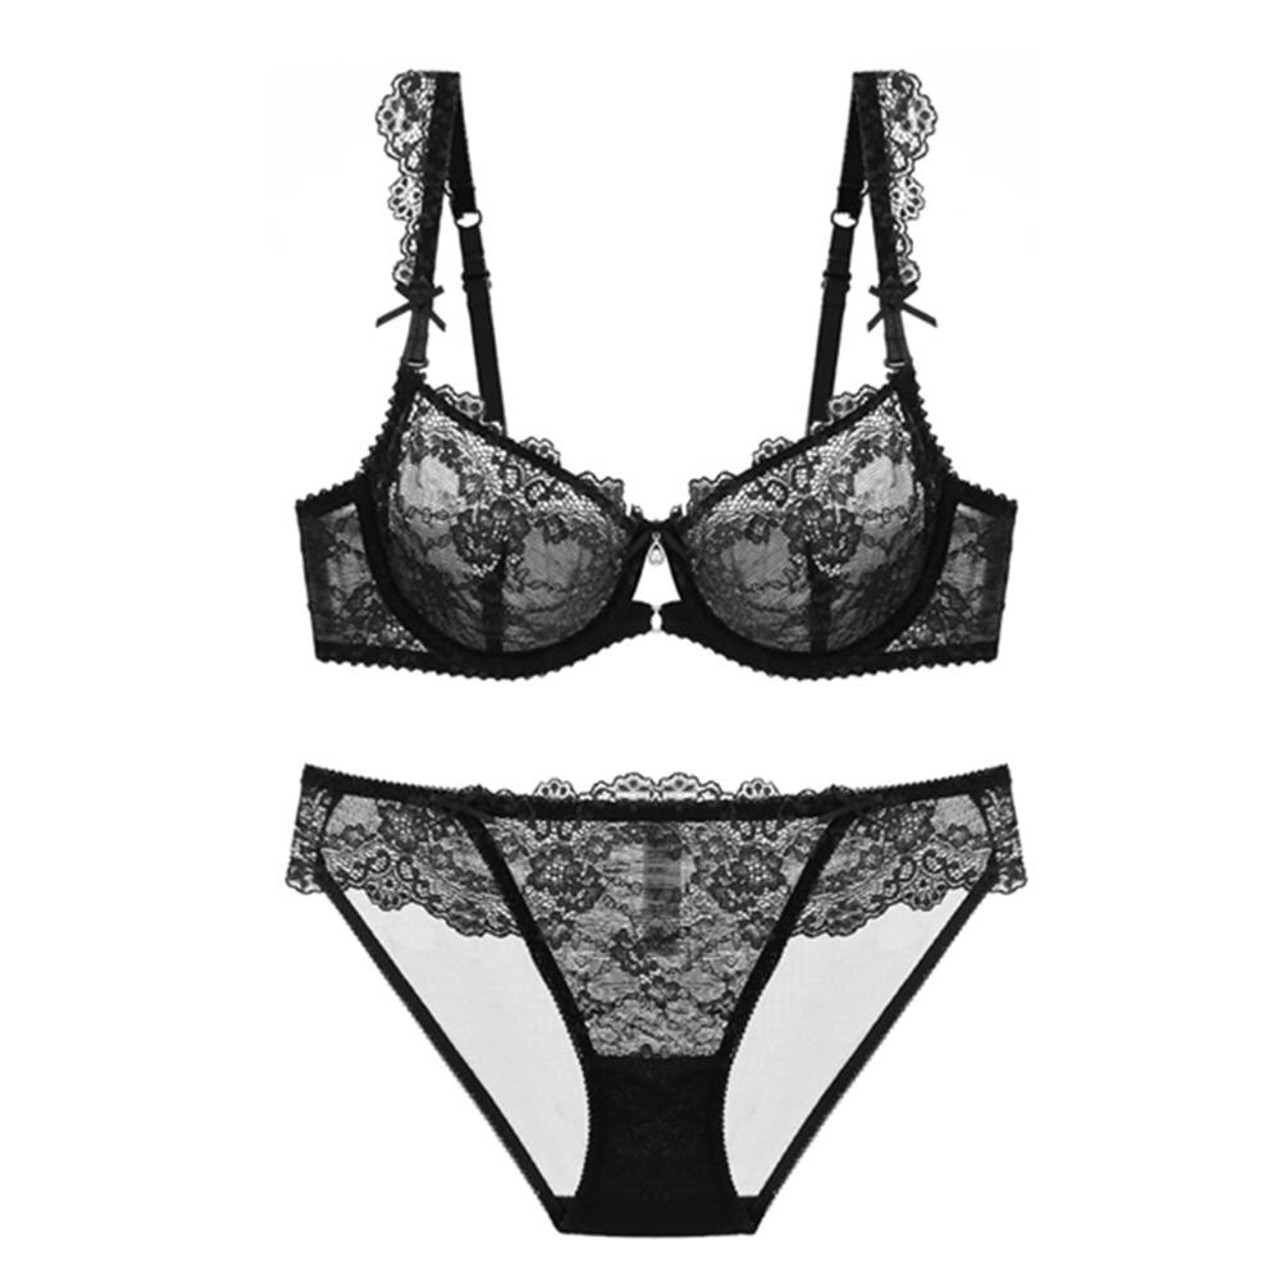 Super Gather Fashion Black Underwear Women Bra Set Push Up Brassiere Cotton  Thick Deep V Sexy Bras Lace Lingerie Sets Embroidery - Price history &  Review